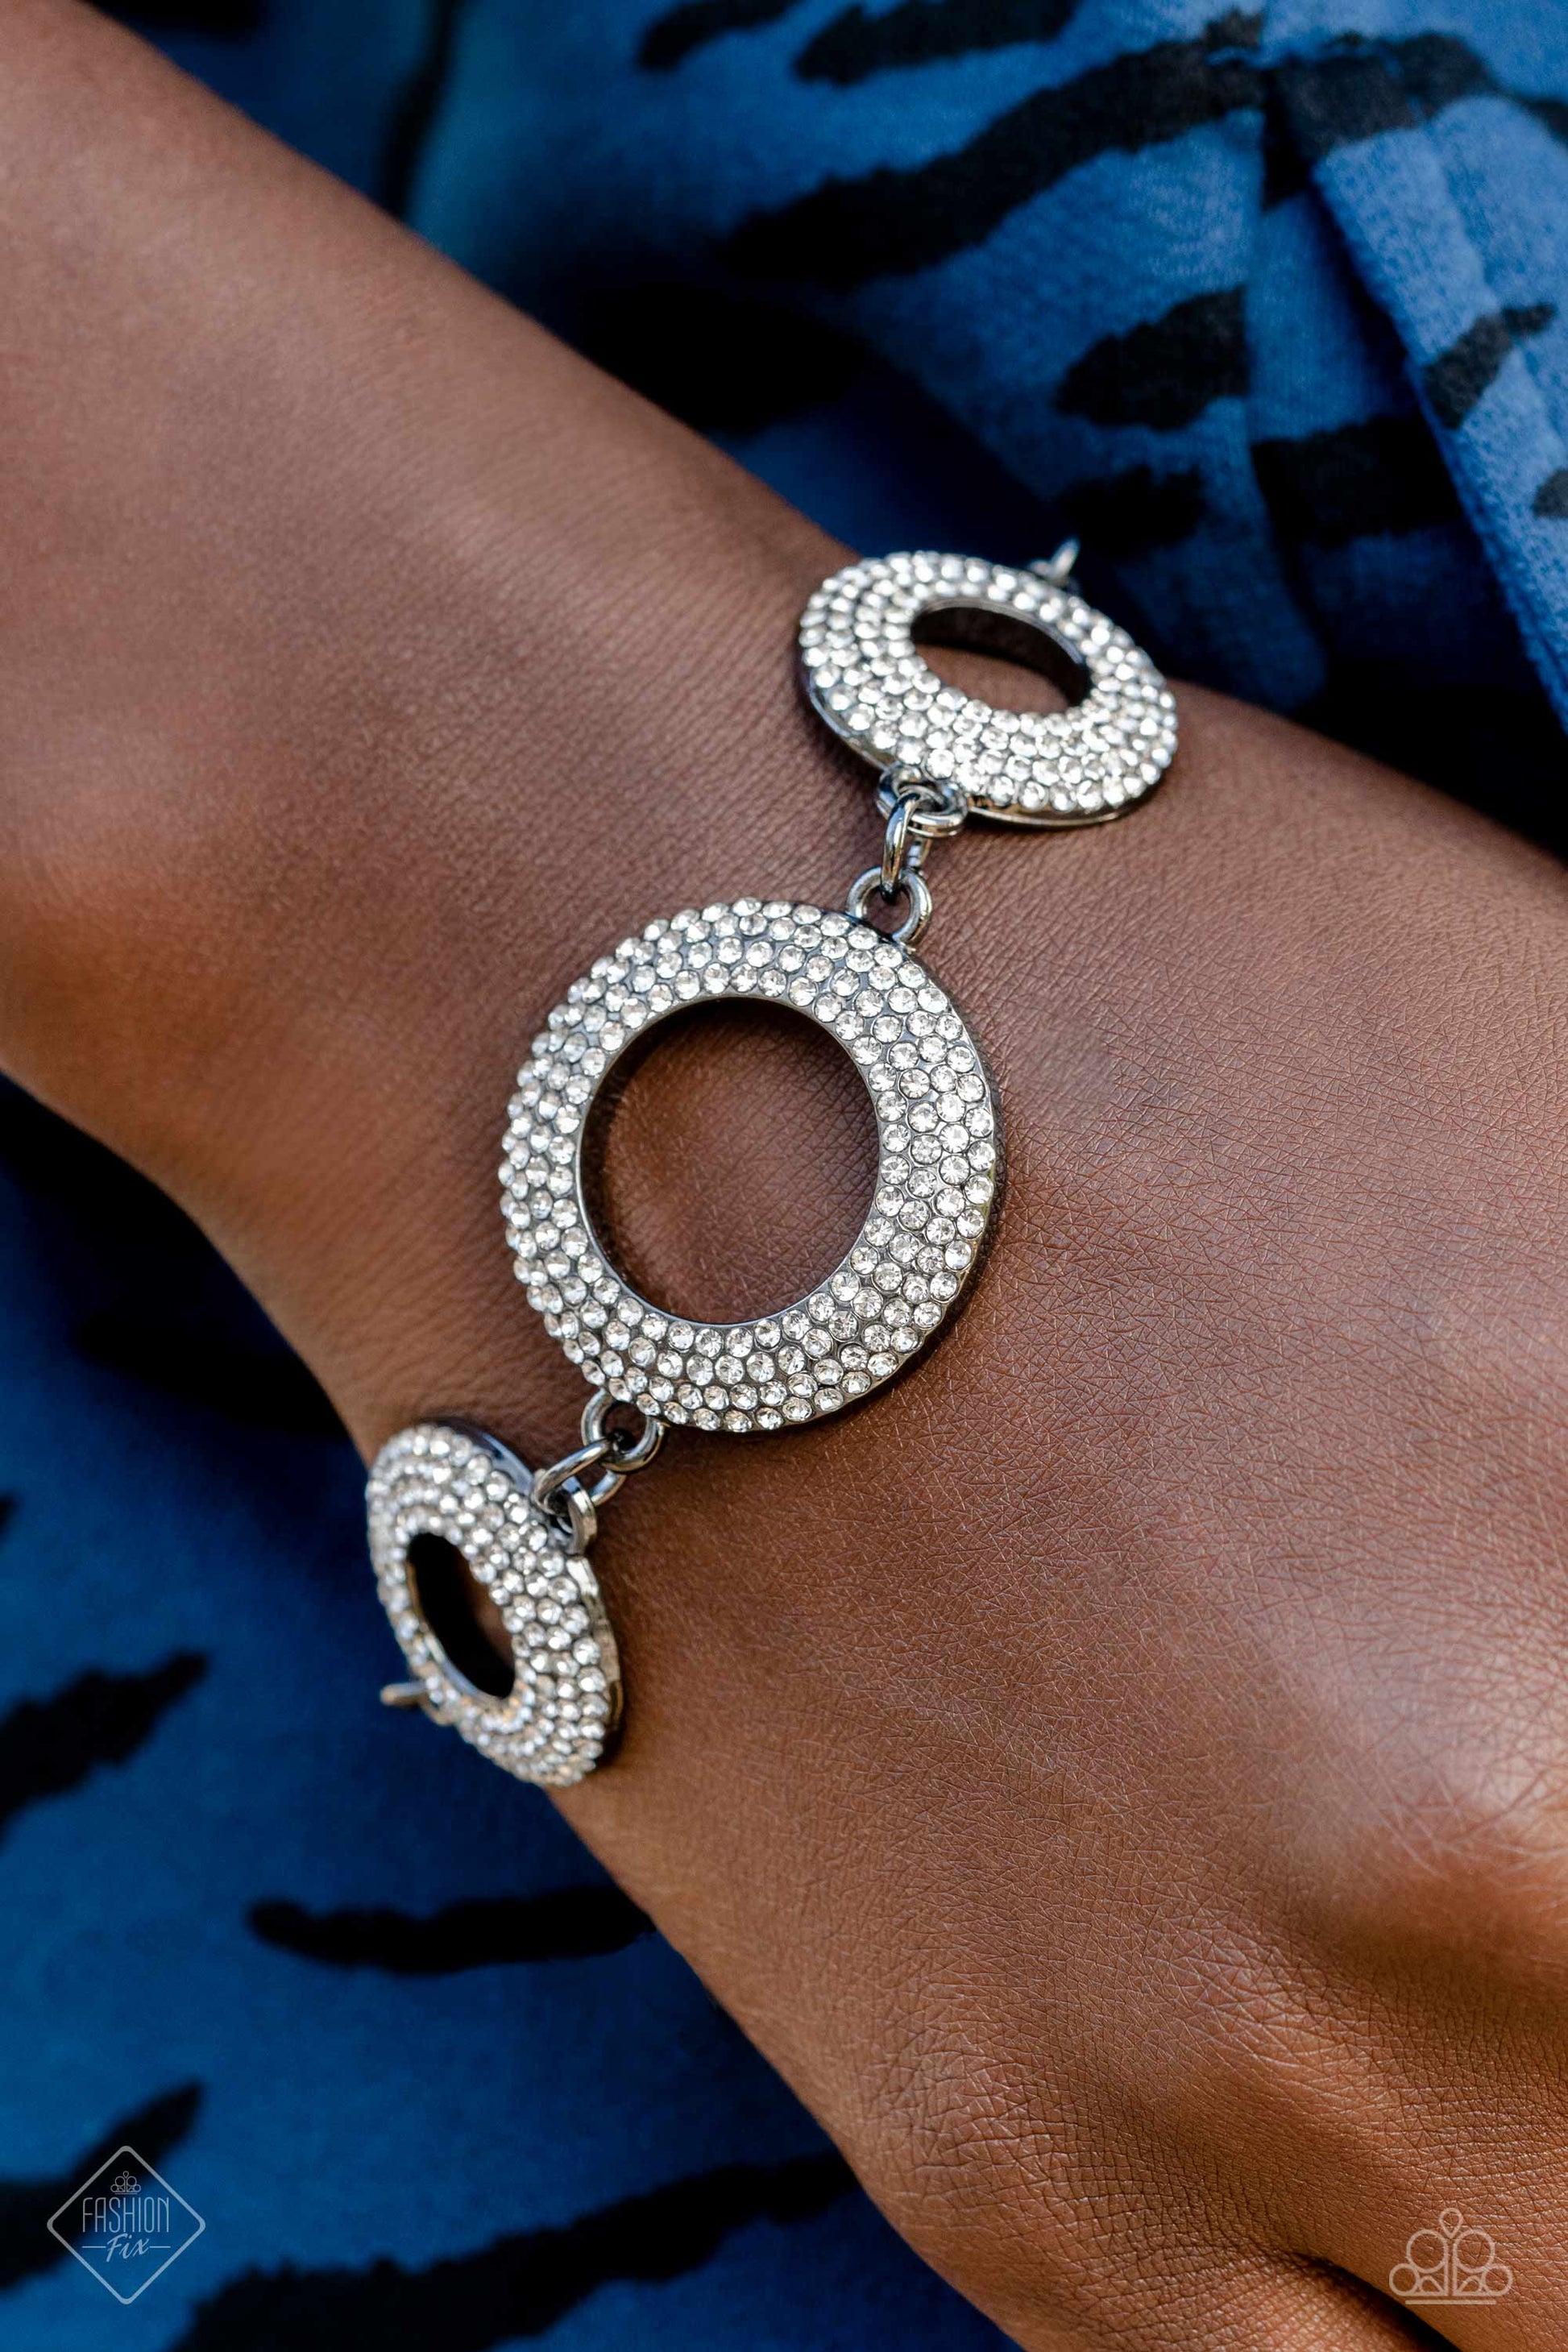 Paparazzi Accessories Magnificent Musings: February 2023 The Magnificent Musings Collection features bold statement pieces and edgy designs. Reveling in sassy, unapologetic fashion, Magnificent Musings mavens confidently express themselves through glamoro